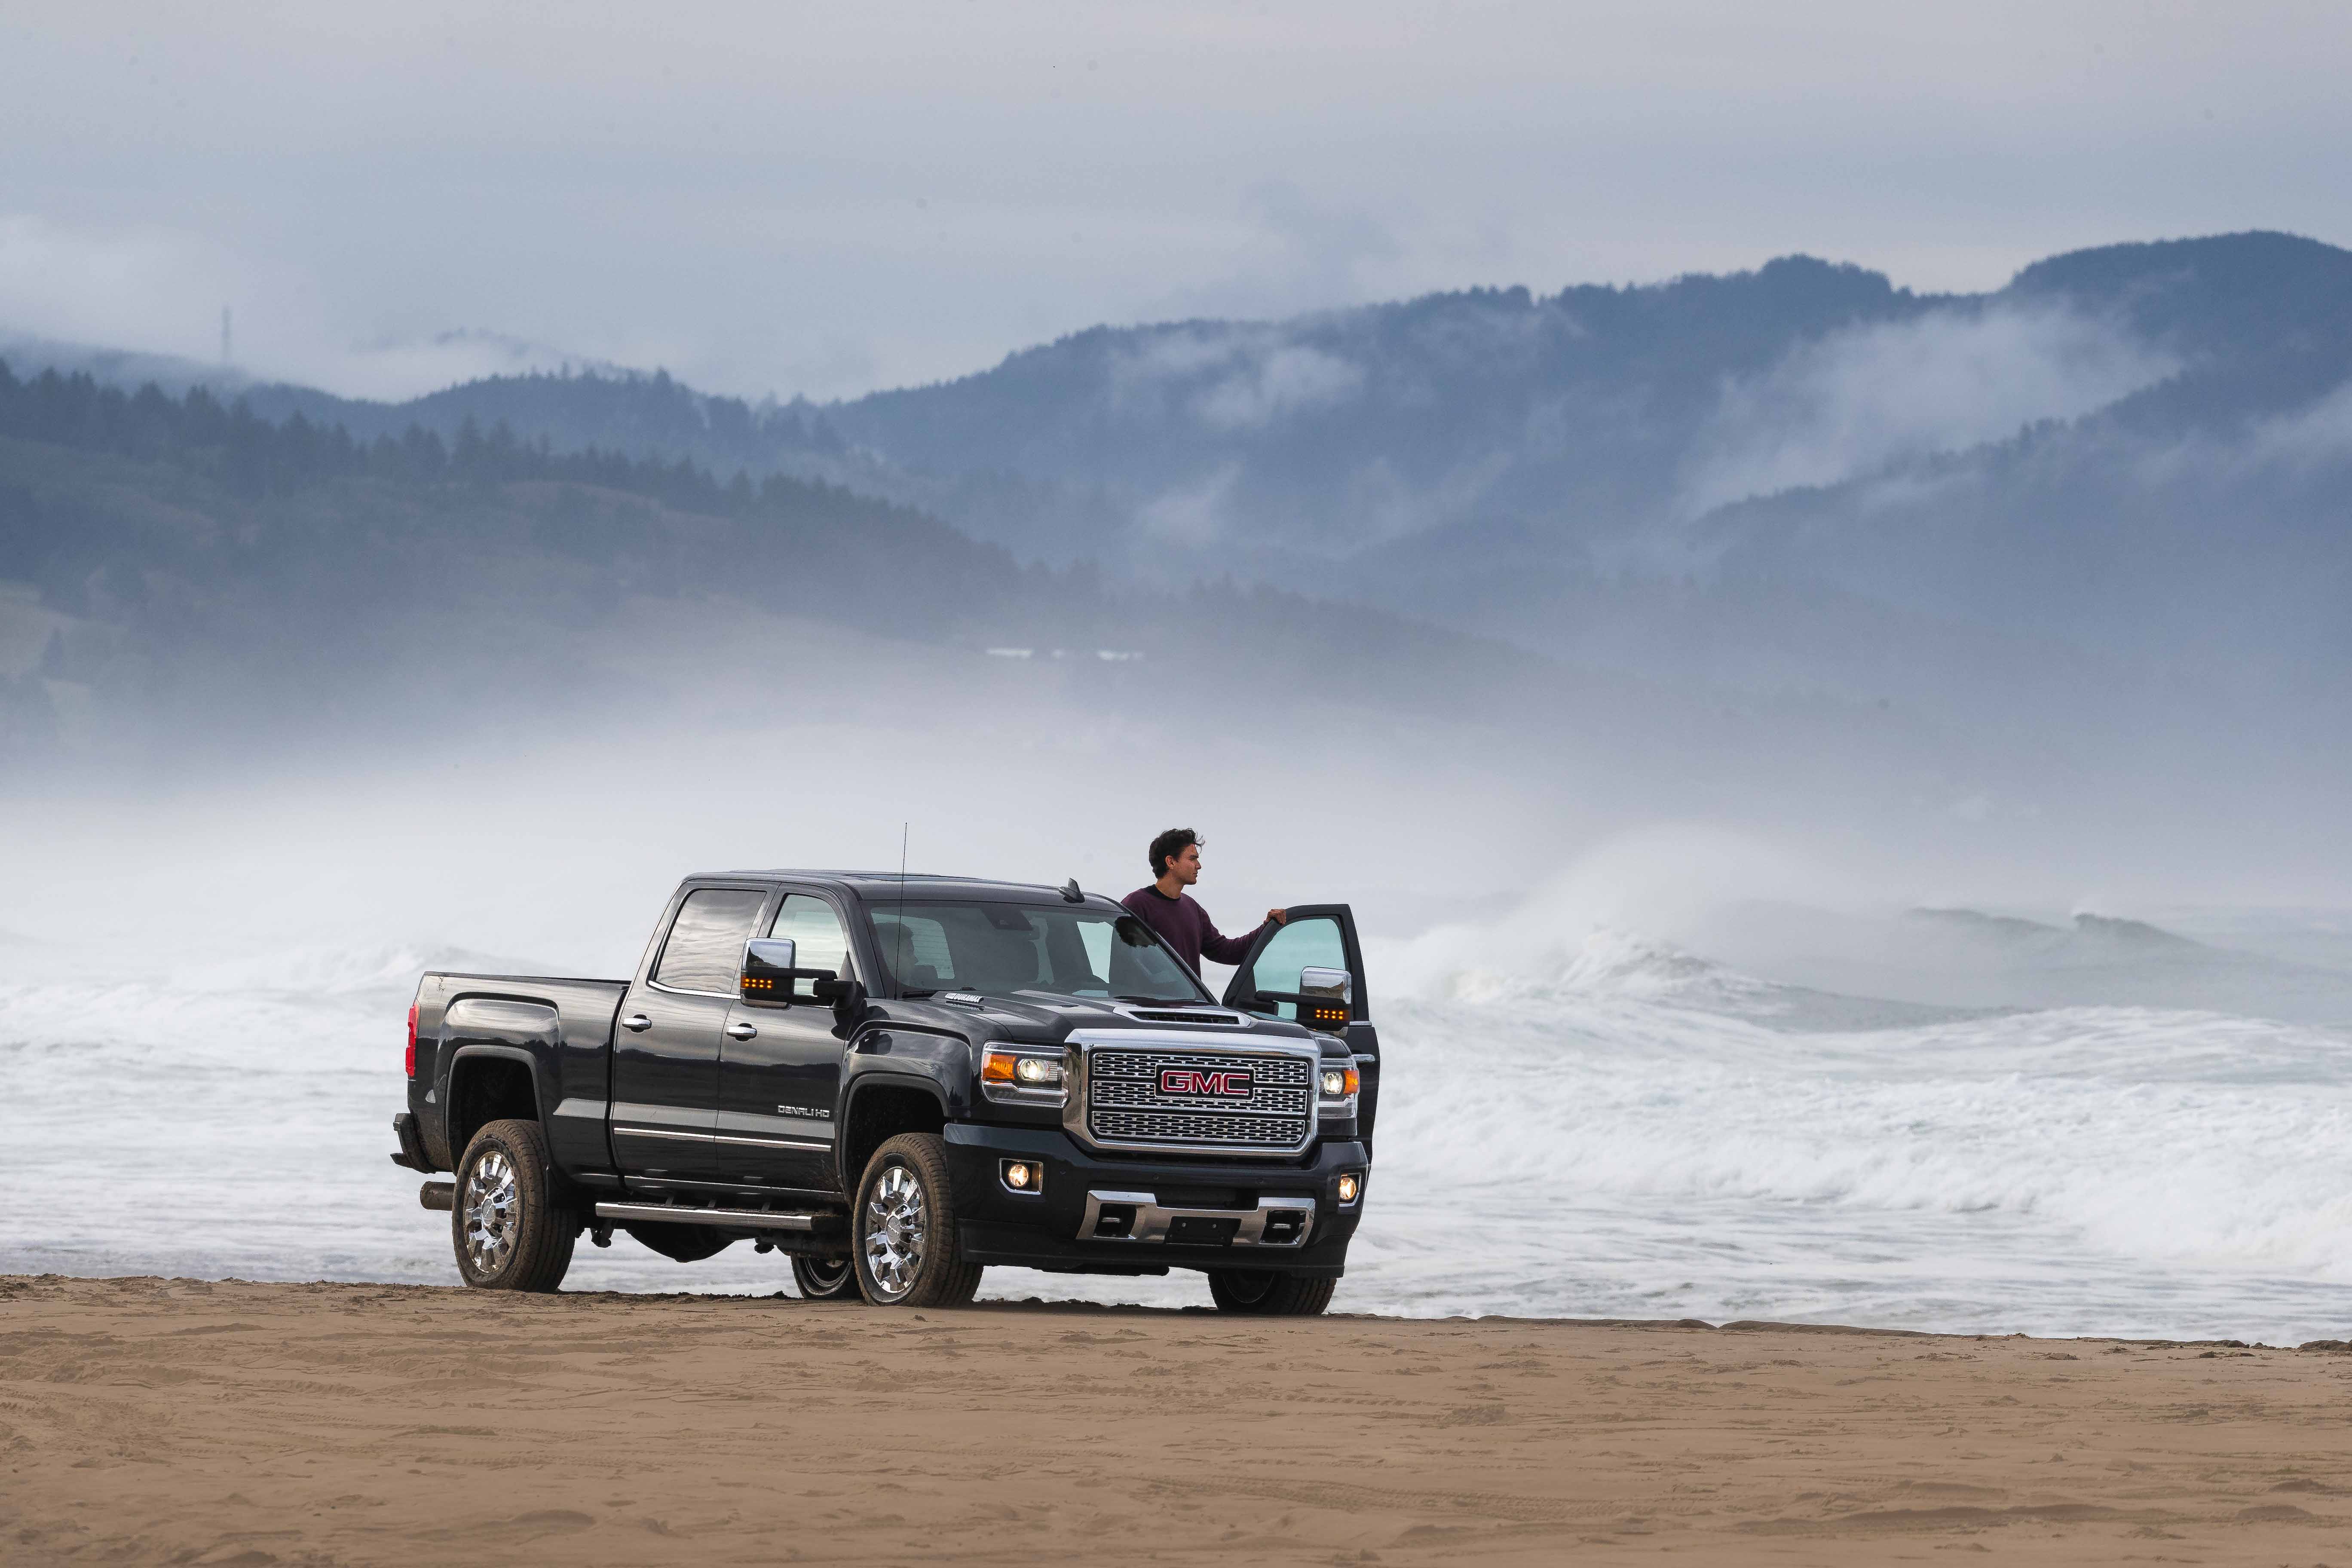 GMC Sierra Denali Truck commercial lifestyle Photography on the Oregon coast by Andrew Studer